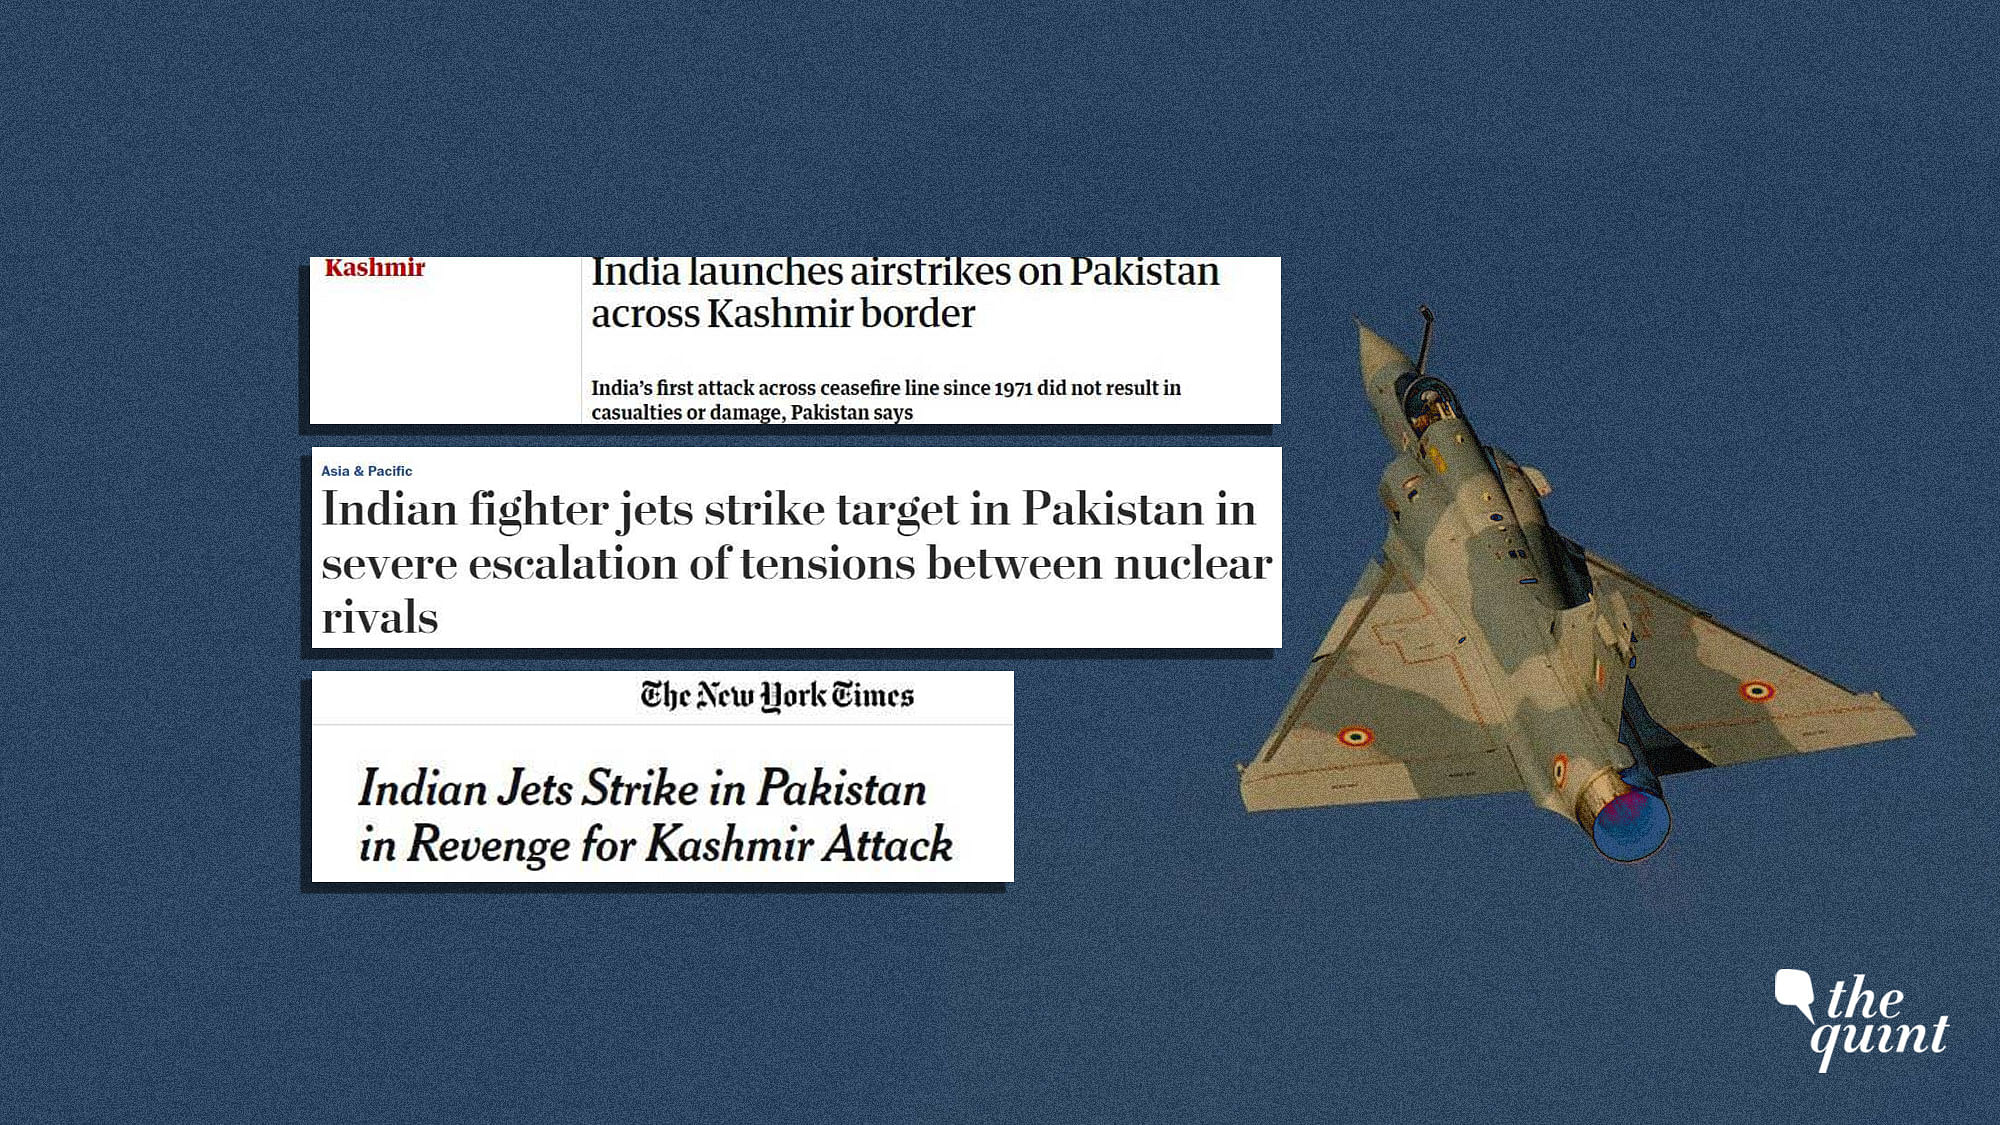 Tuesday’s air strikes by IAF across the LoC will have major repercussions on relations between India and Pakistan.